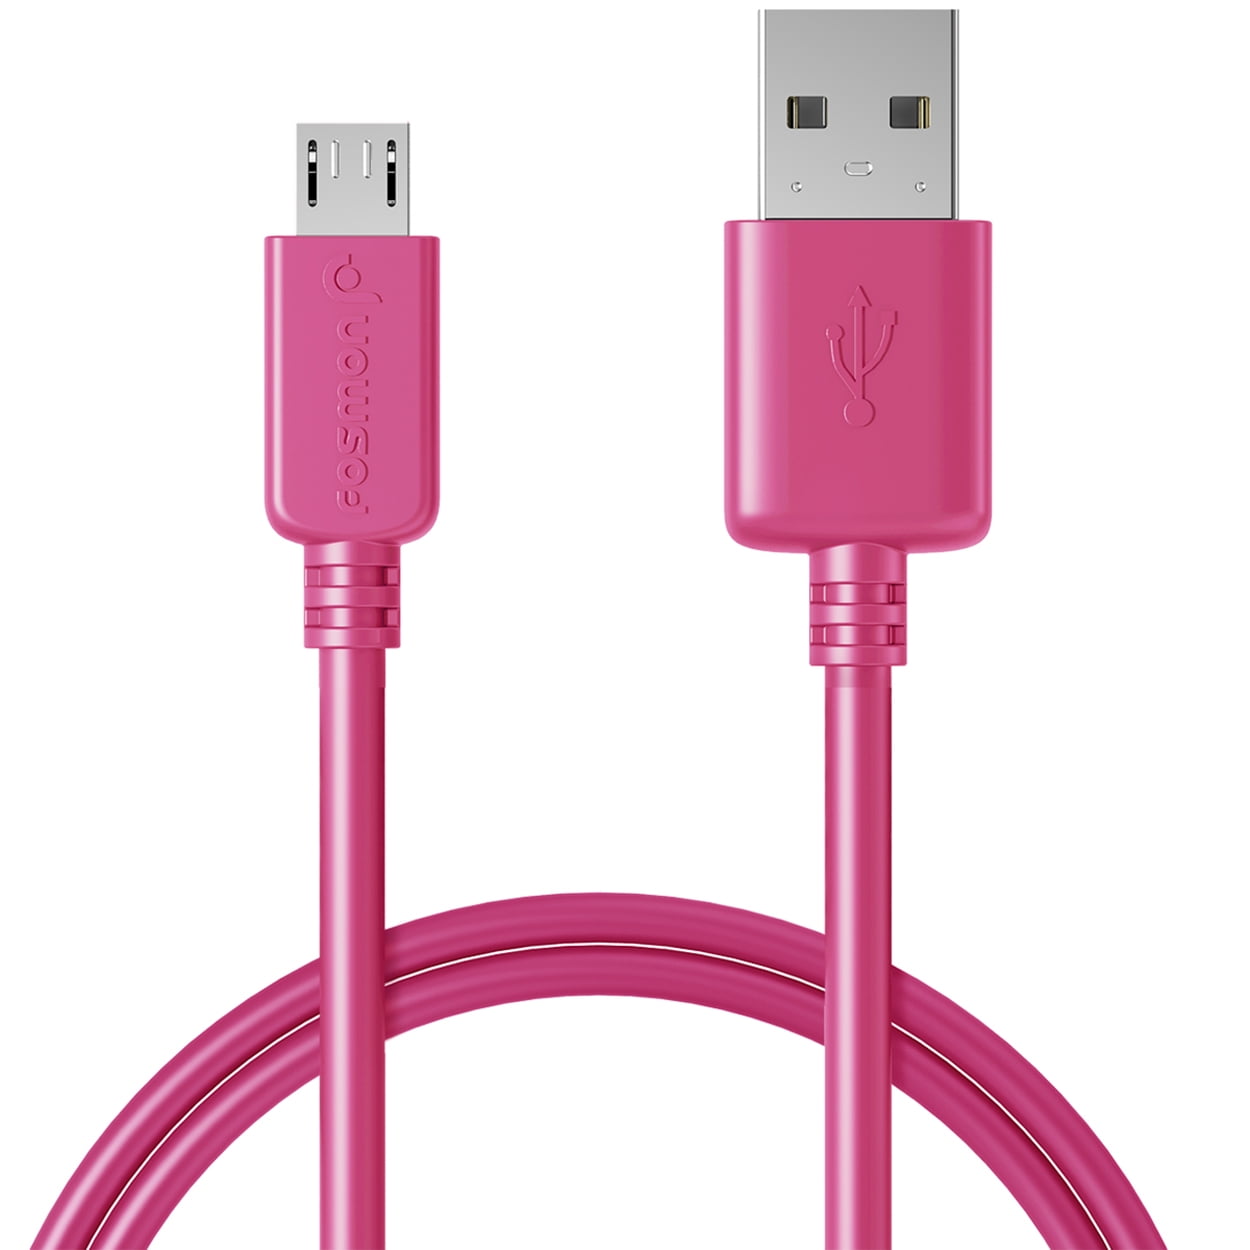 Fosmon Micro USB Cable, (3FT - Hot Pink) Ultra Durable (TPE Jacket & Housing) Sync Charge Cable for Samsung Galaxy S7 / S7 Edge / S6 / S5, Moto G/X/V, LG G4/G3, Nokia Series and More